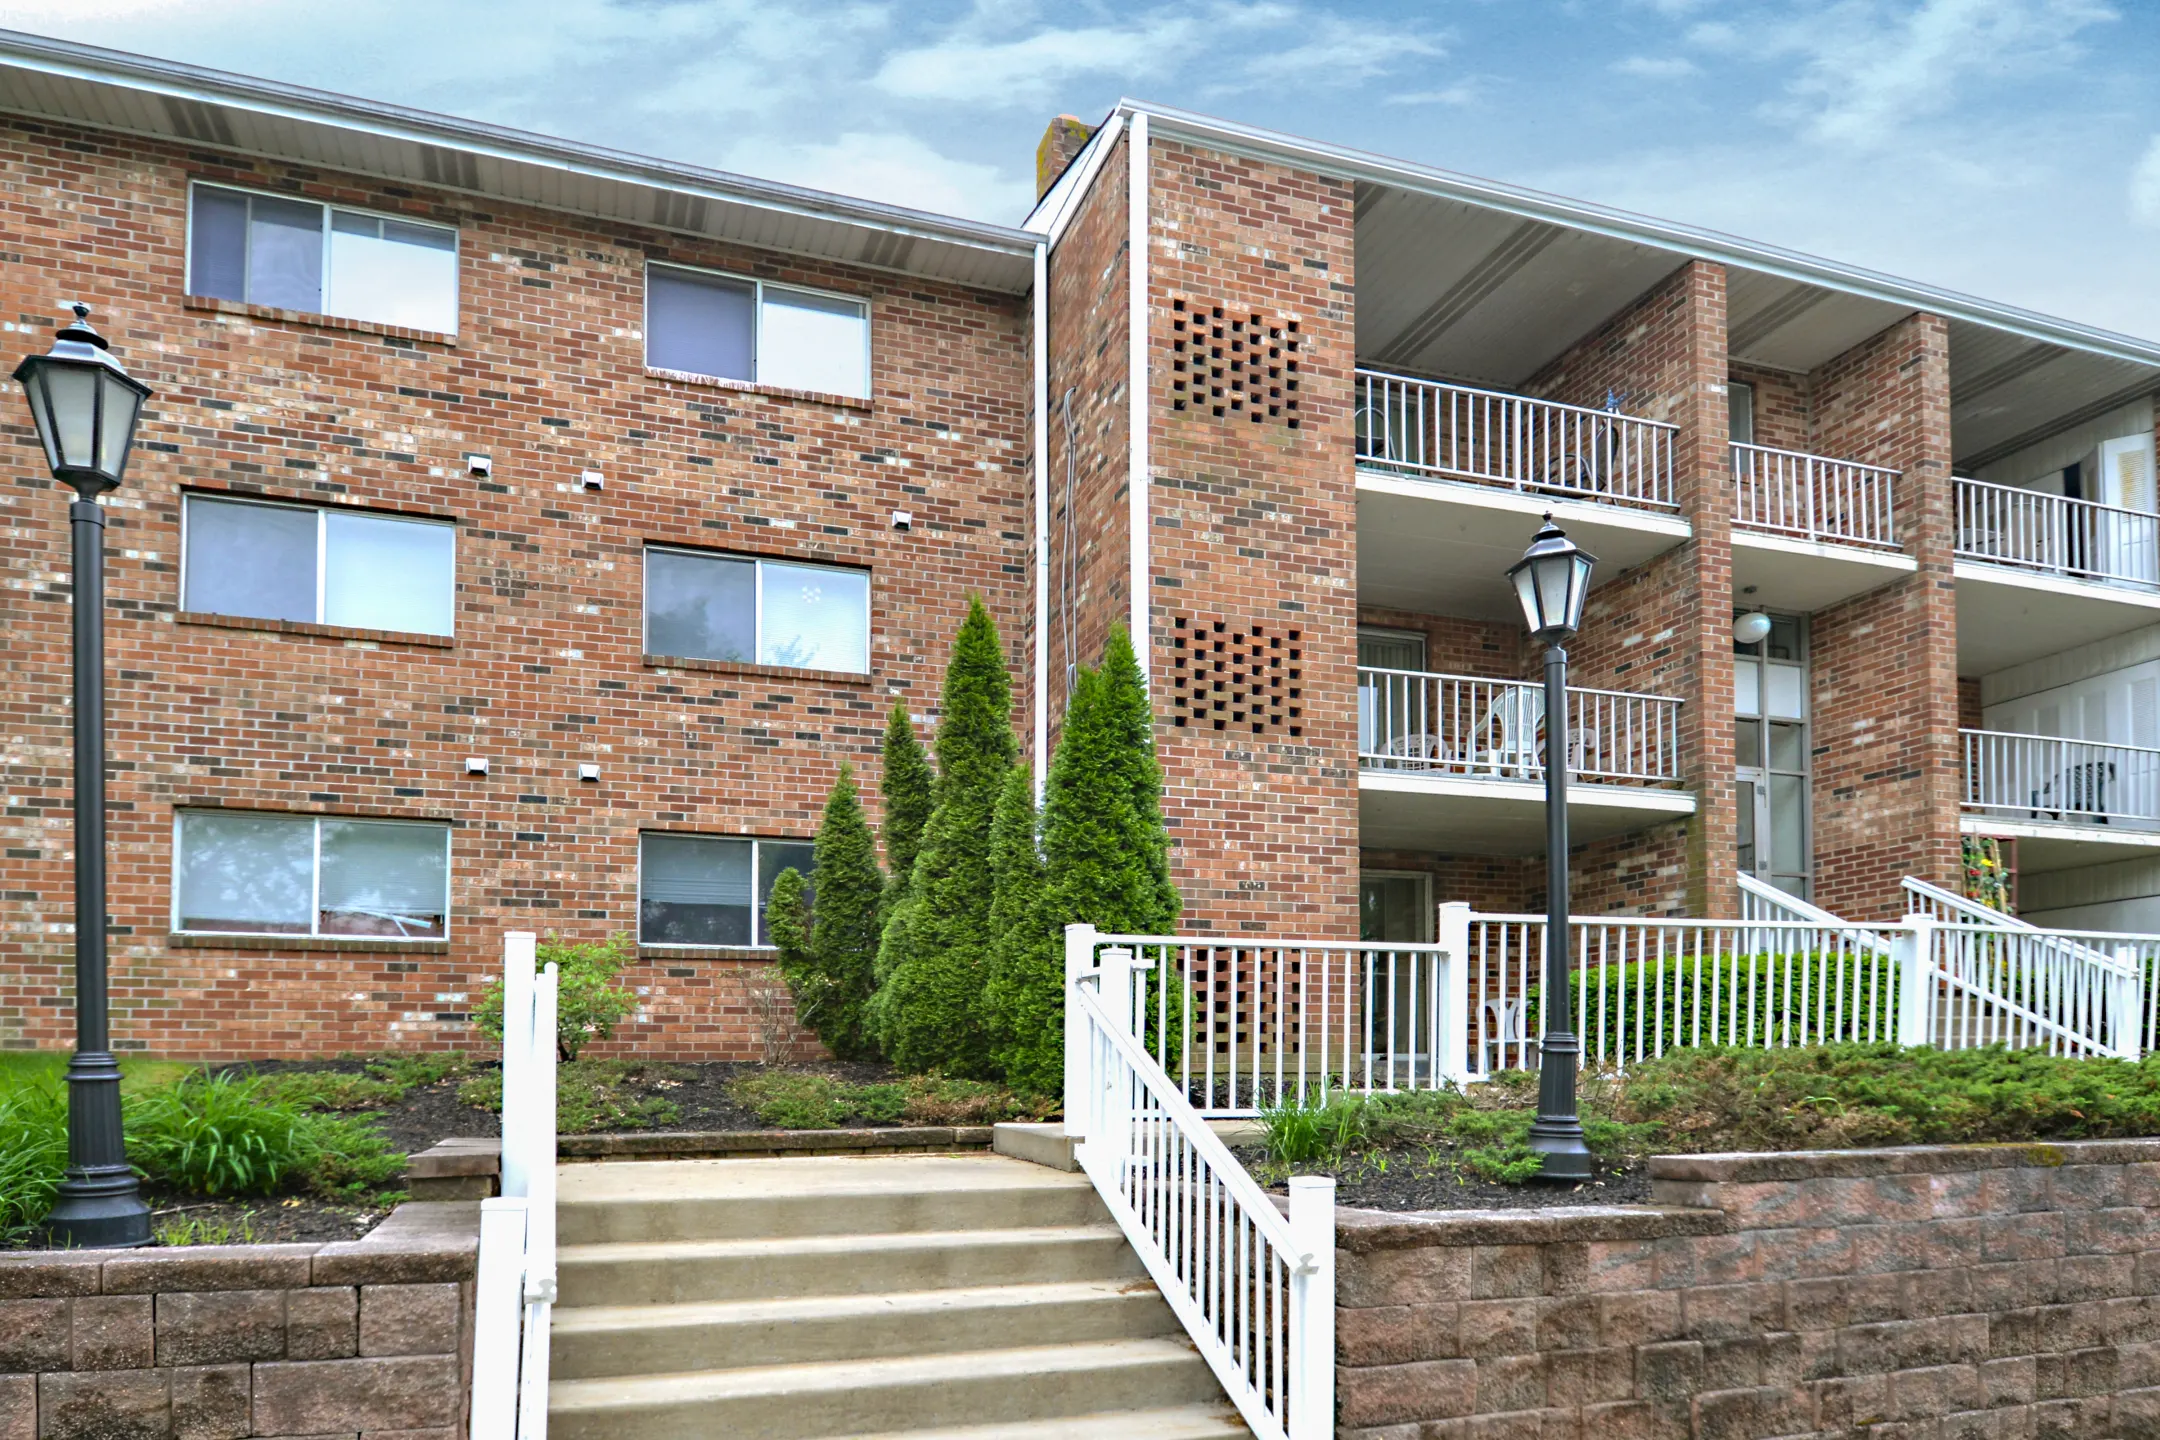 Building - Eagle Stream Apartments - Norristown, PA